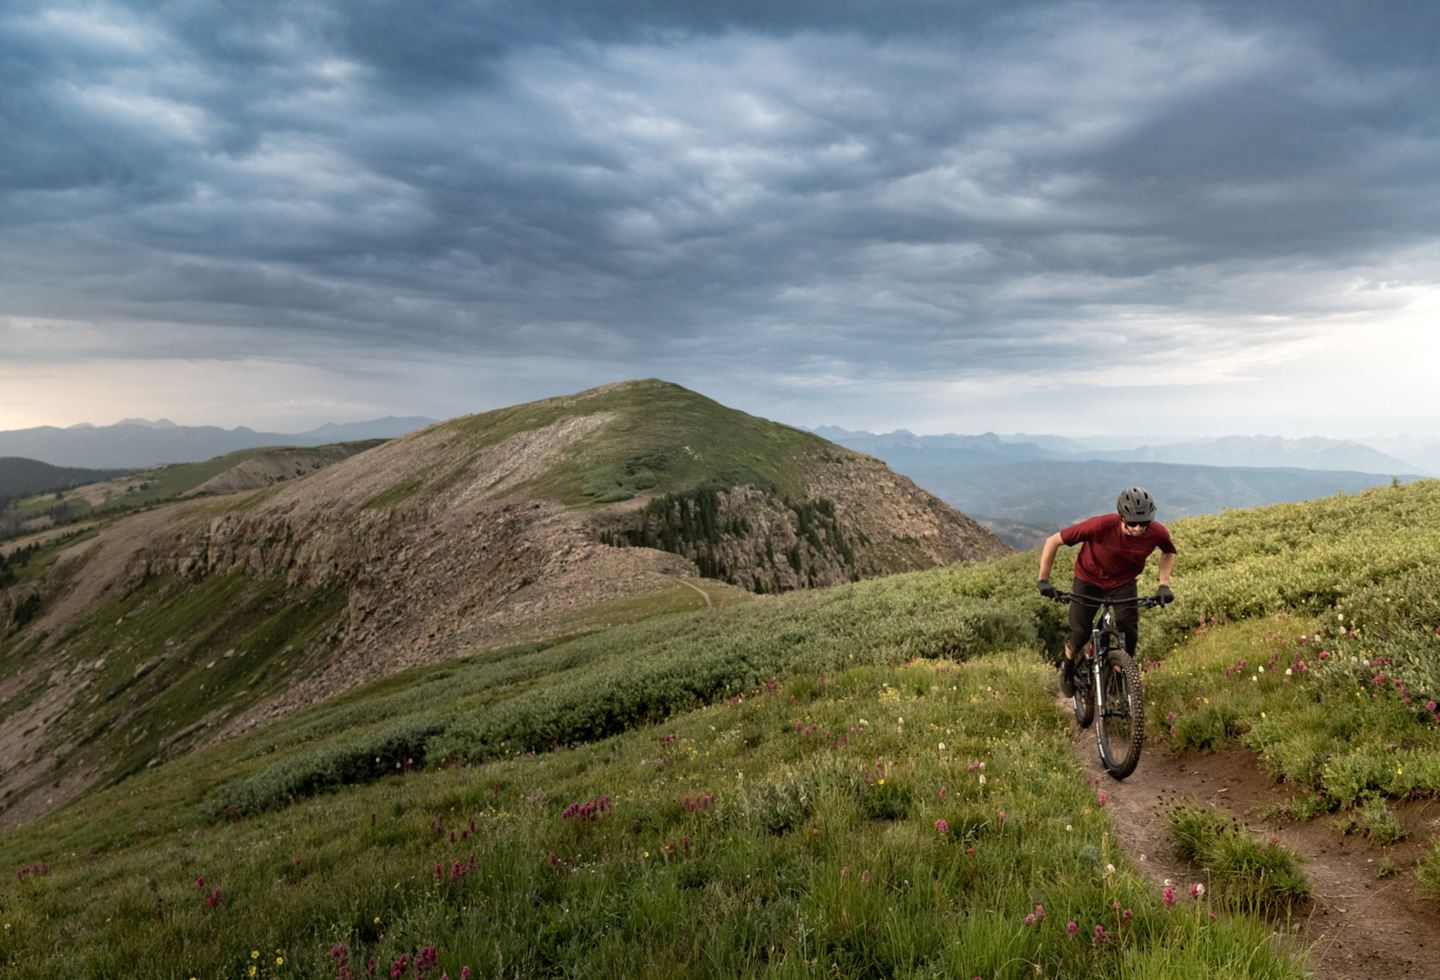 Rider on singletrack in the mountains